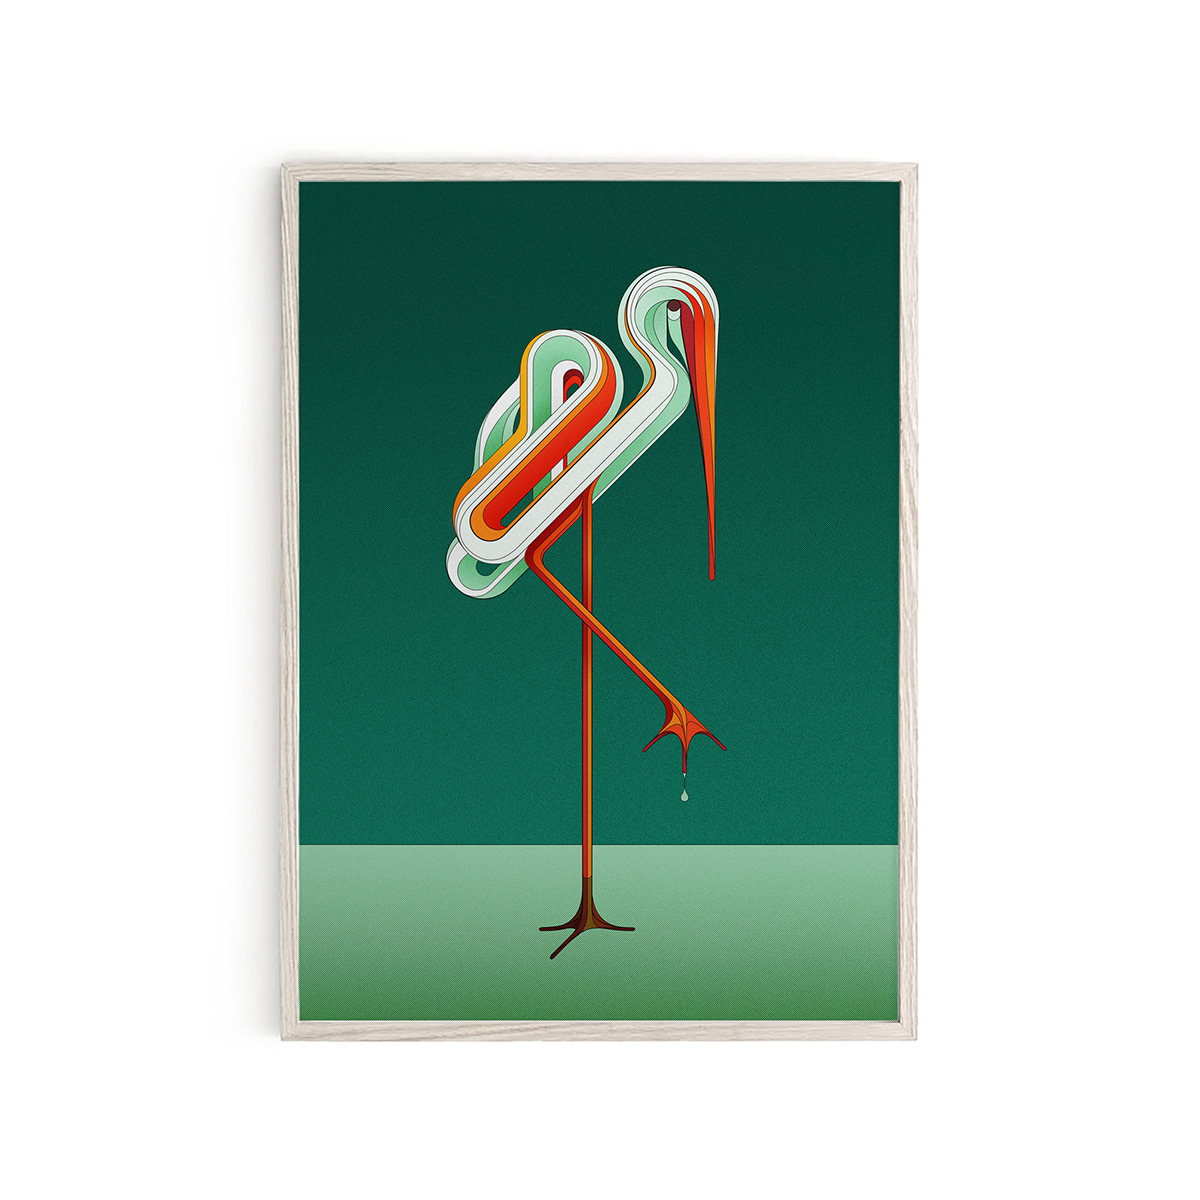 a3 giclee print of a geometric illustration of a stork by Made Up Studio / Charles Williams